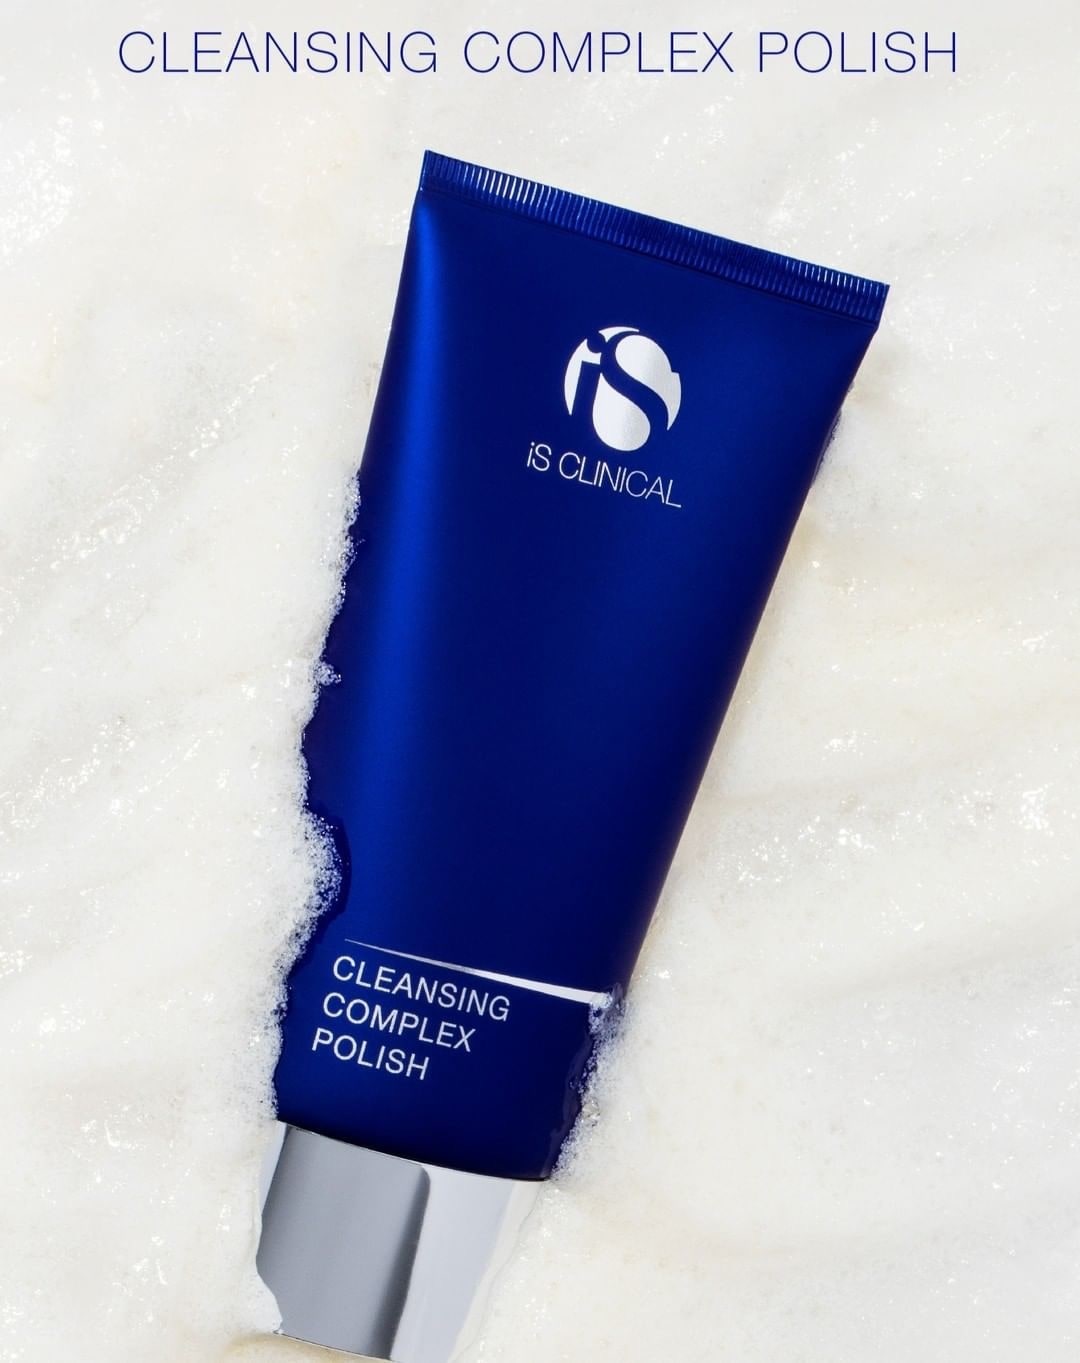  CLEANSING COMPLEX POLISH from iS Clinical is sold in Canada at Lumilaser Esthetics.